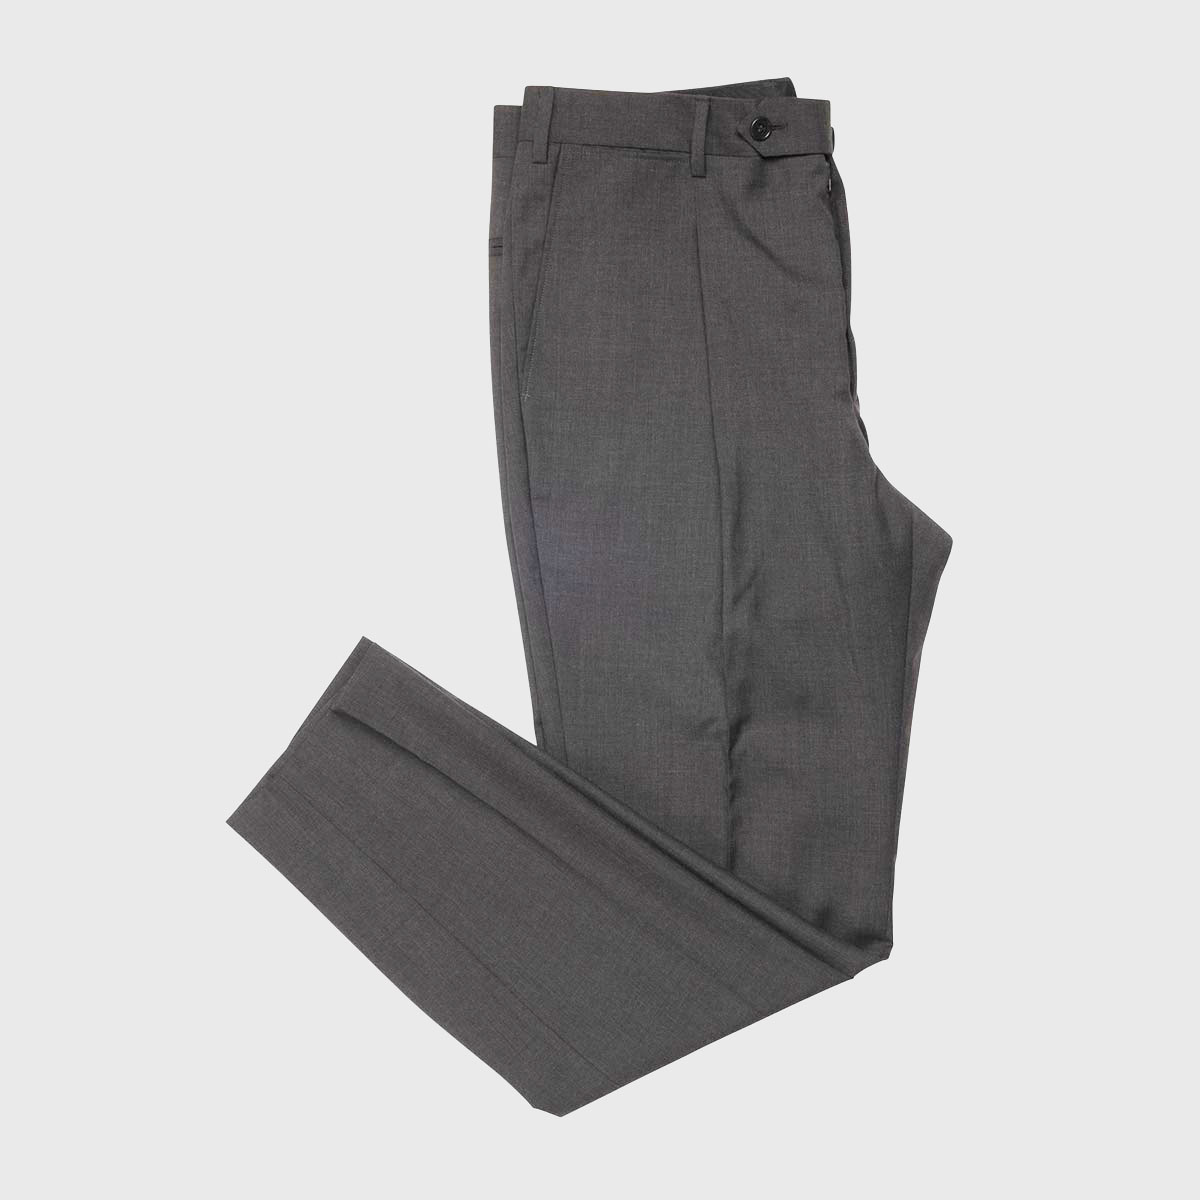 1 Pleat Super 100’s Wool Trousers in Gray Sartoria Lavore on sale 2022